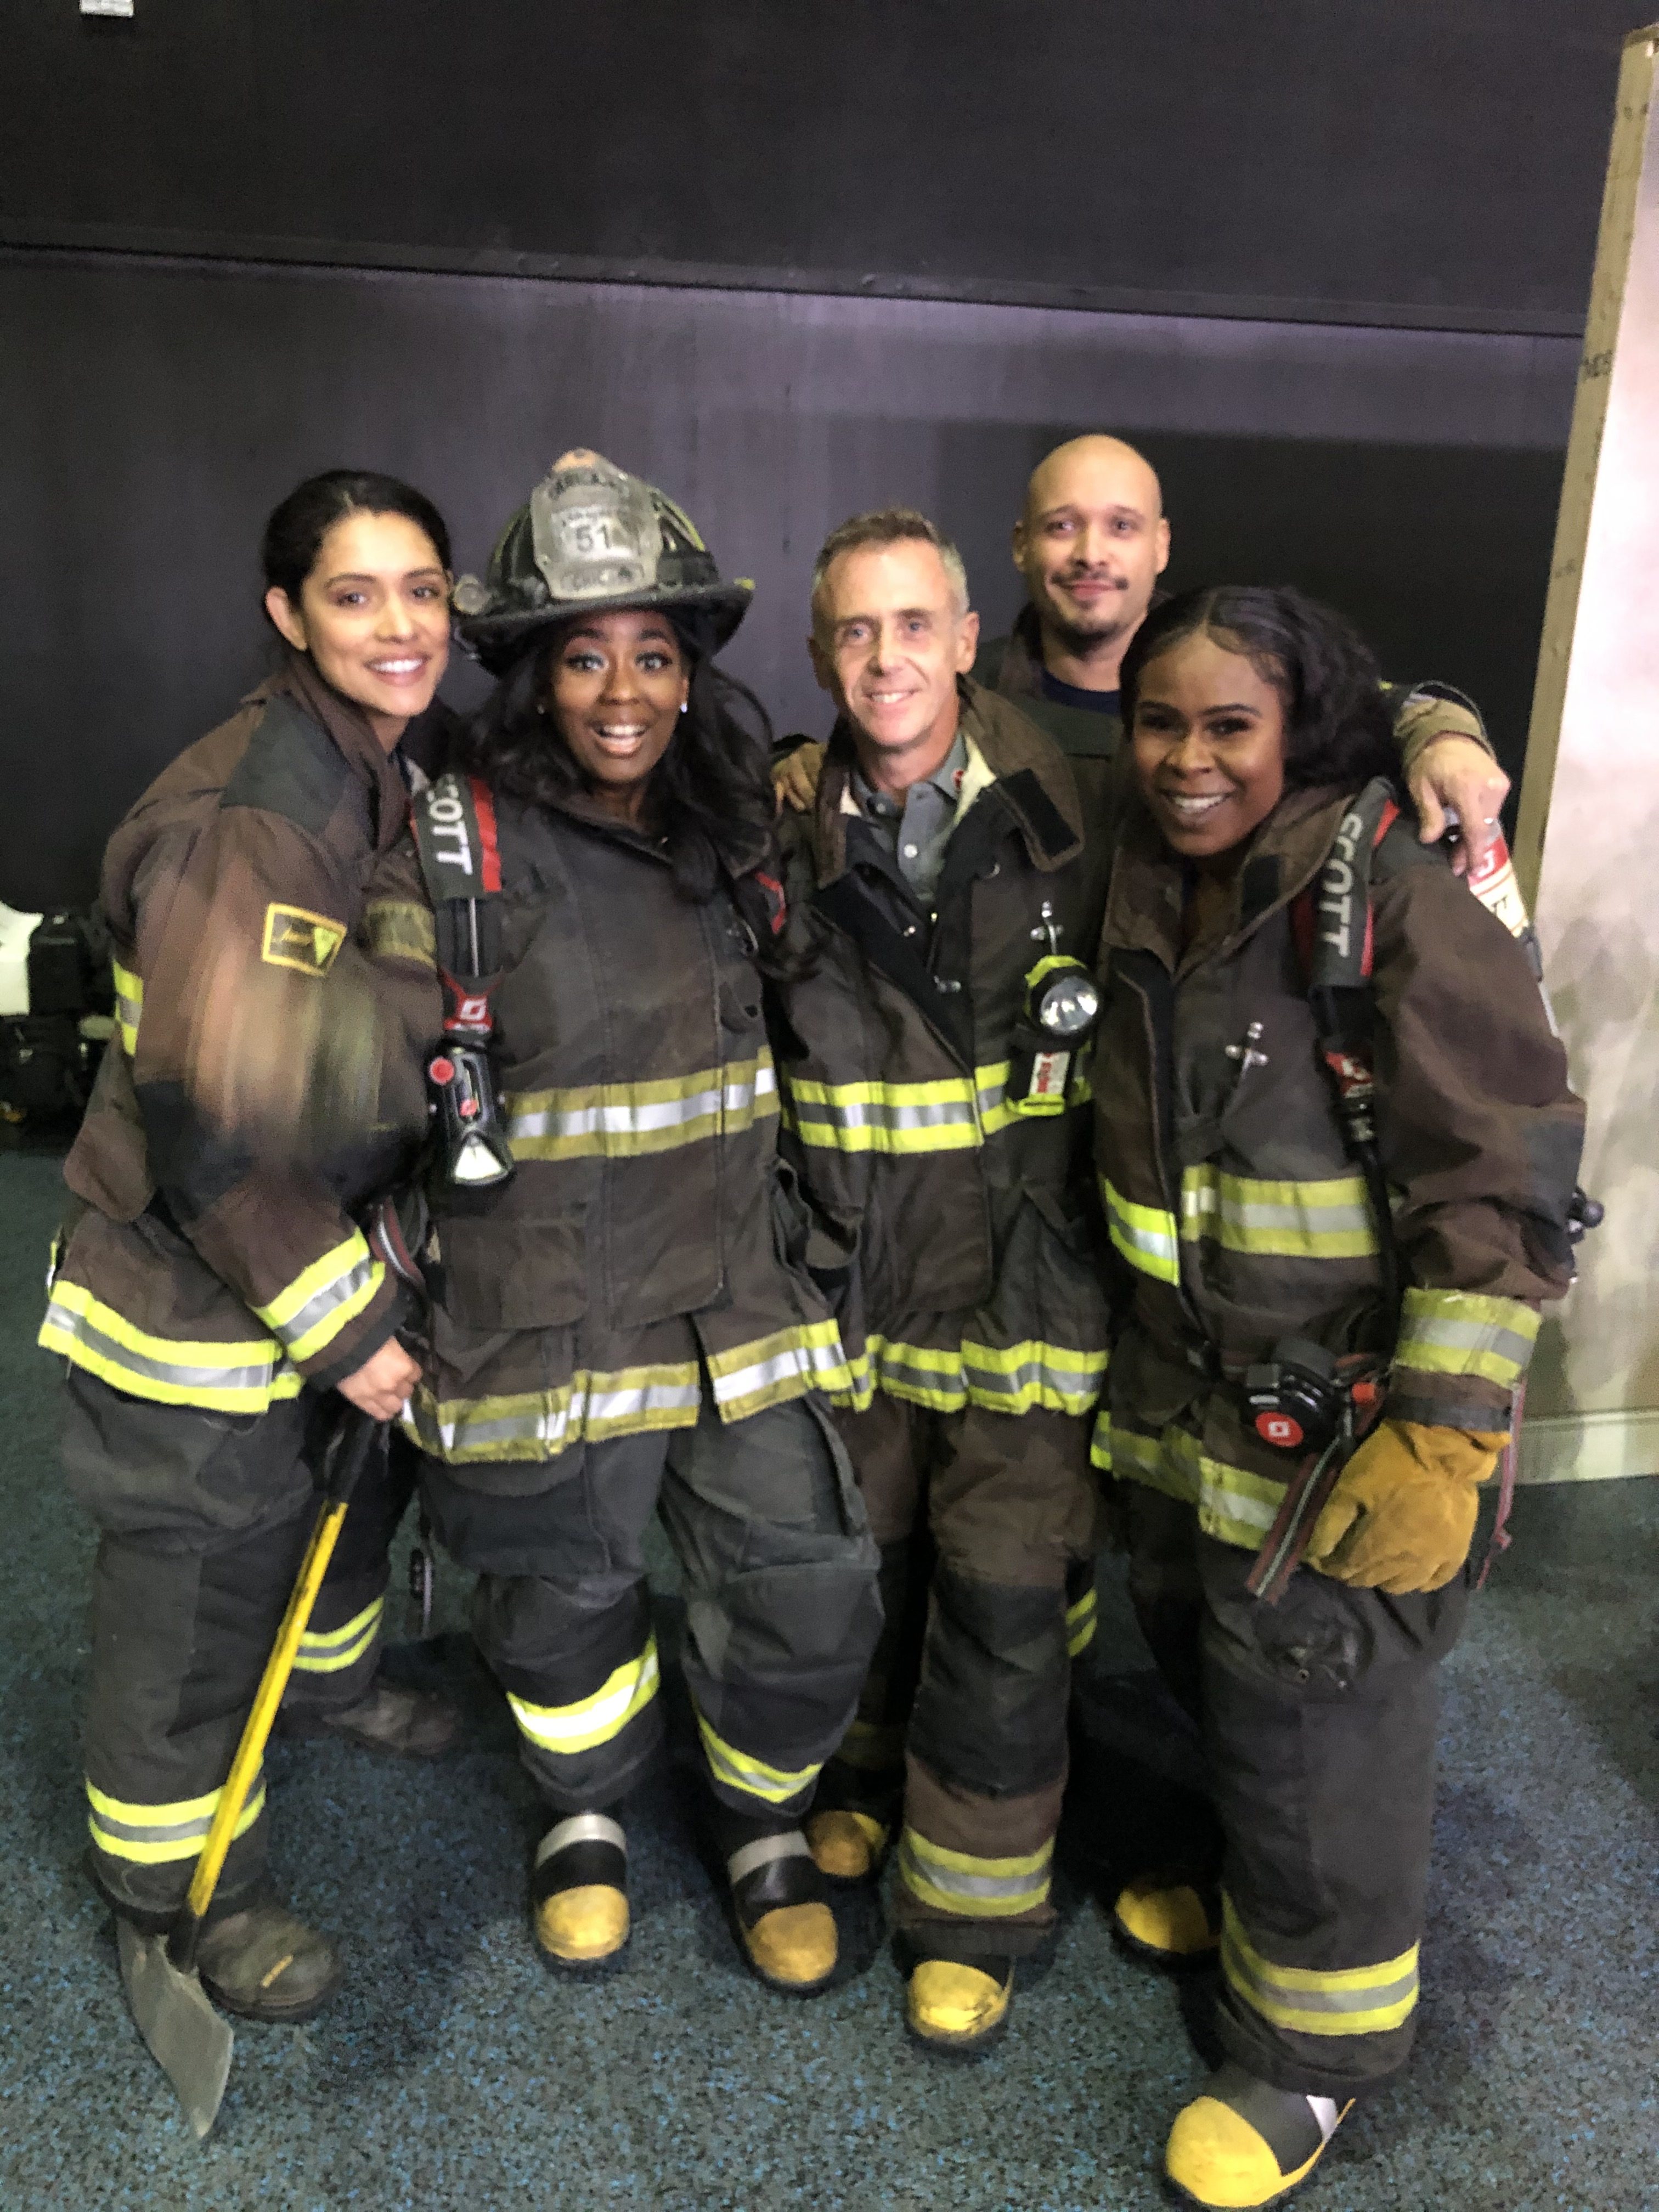 I Spent An Afternoon As A Fireman With The Cast Of Chicago Fire!